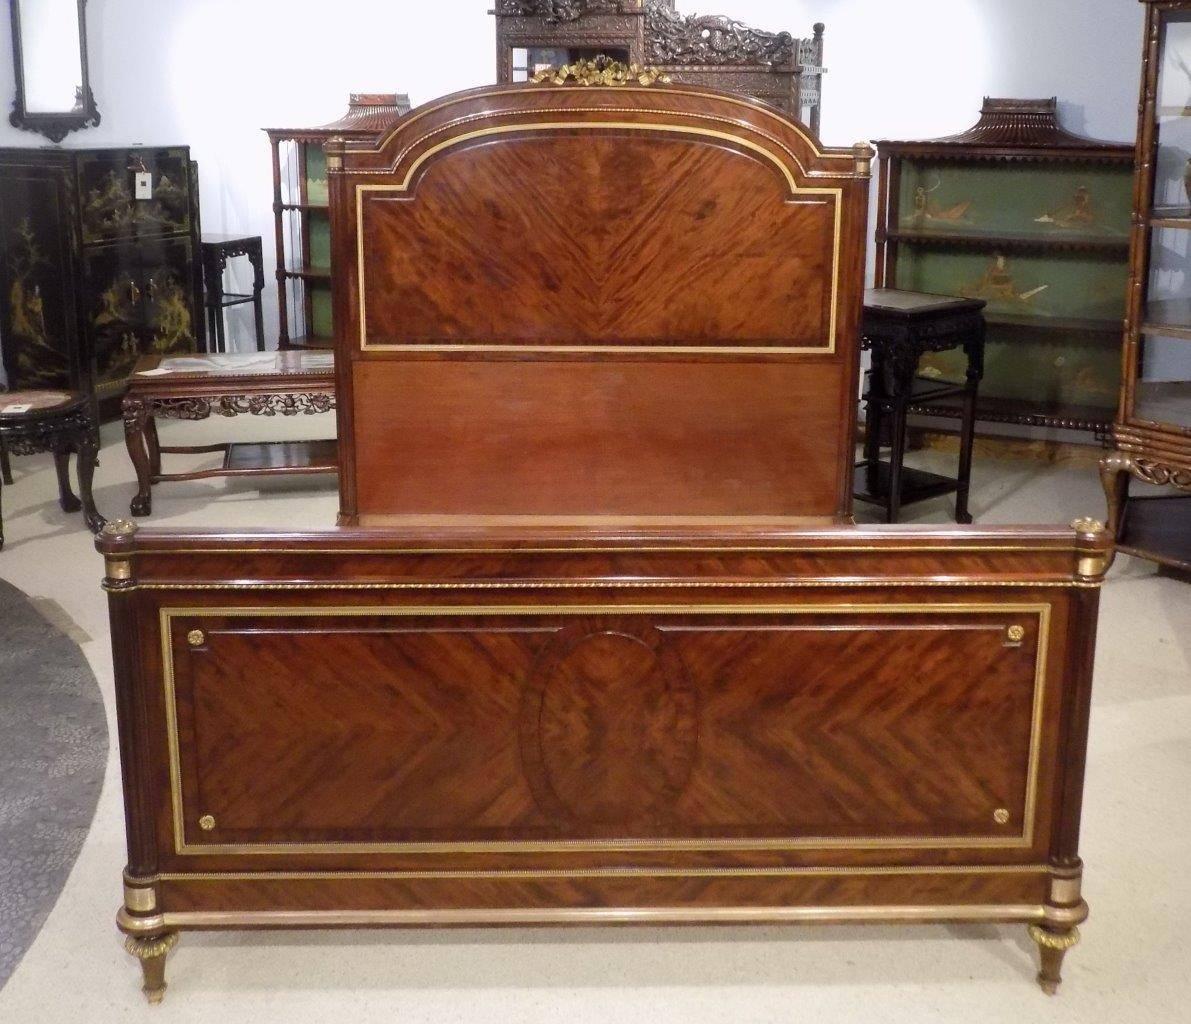 A superb French 19th century figured mahogany and ormolu-mounted antique king-size bed. The headboard having a finely cast ormolu ribbon and swag cartouche, above the central figured mahogany panel, with fluted column supports and fine quality cast